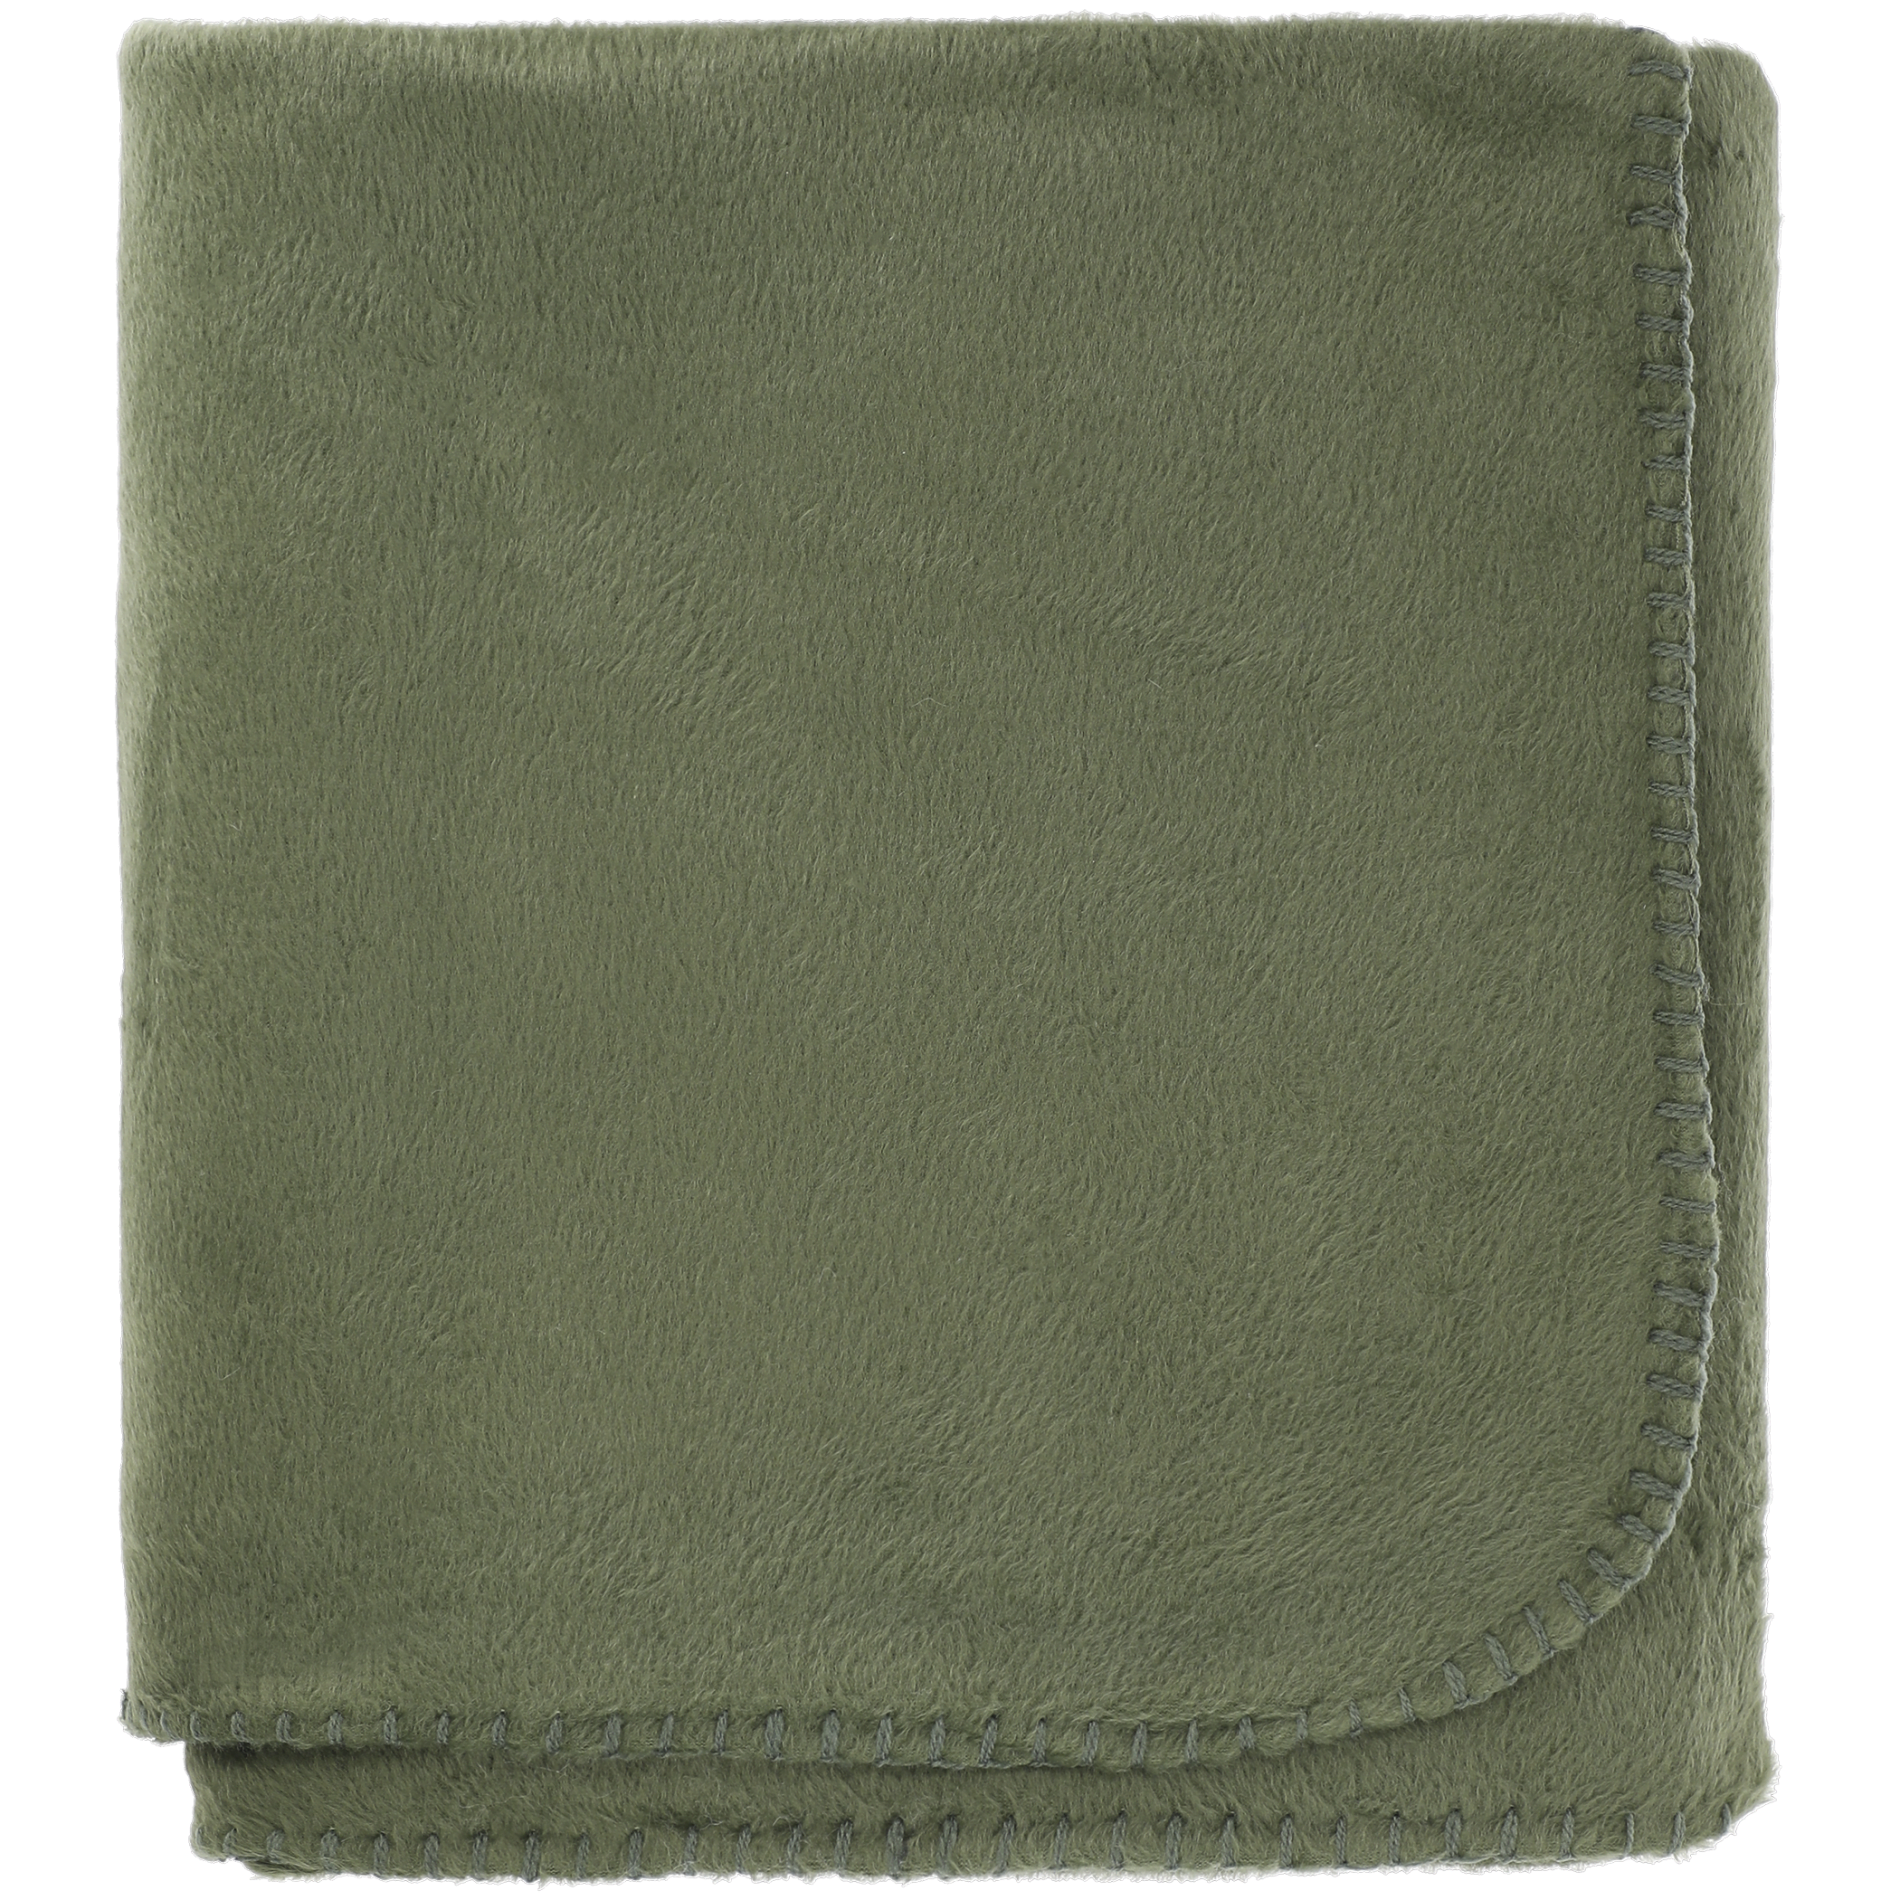 LEEDS 1081-57 - 100% Recycled PET Fleece Blanket with RPET Pouch